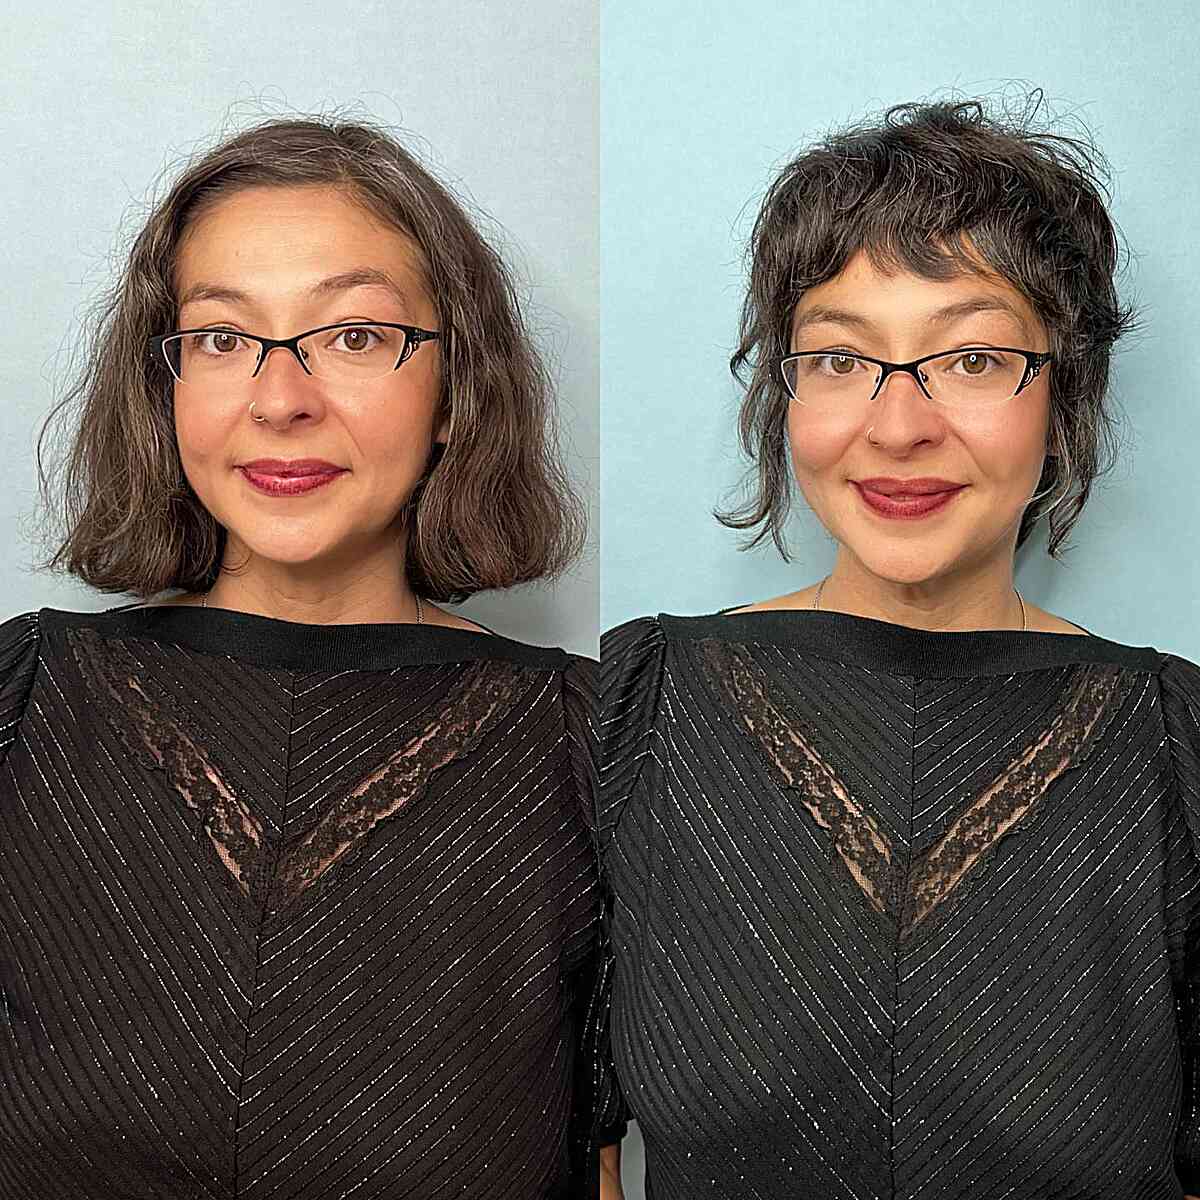 Fun and Short Low-Maintenance Cut for ladies with glasses